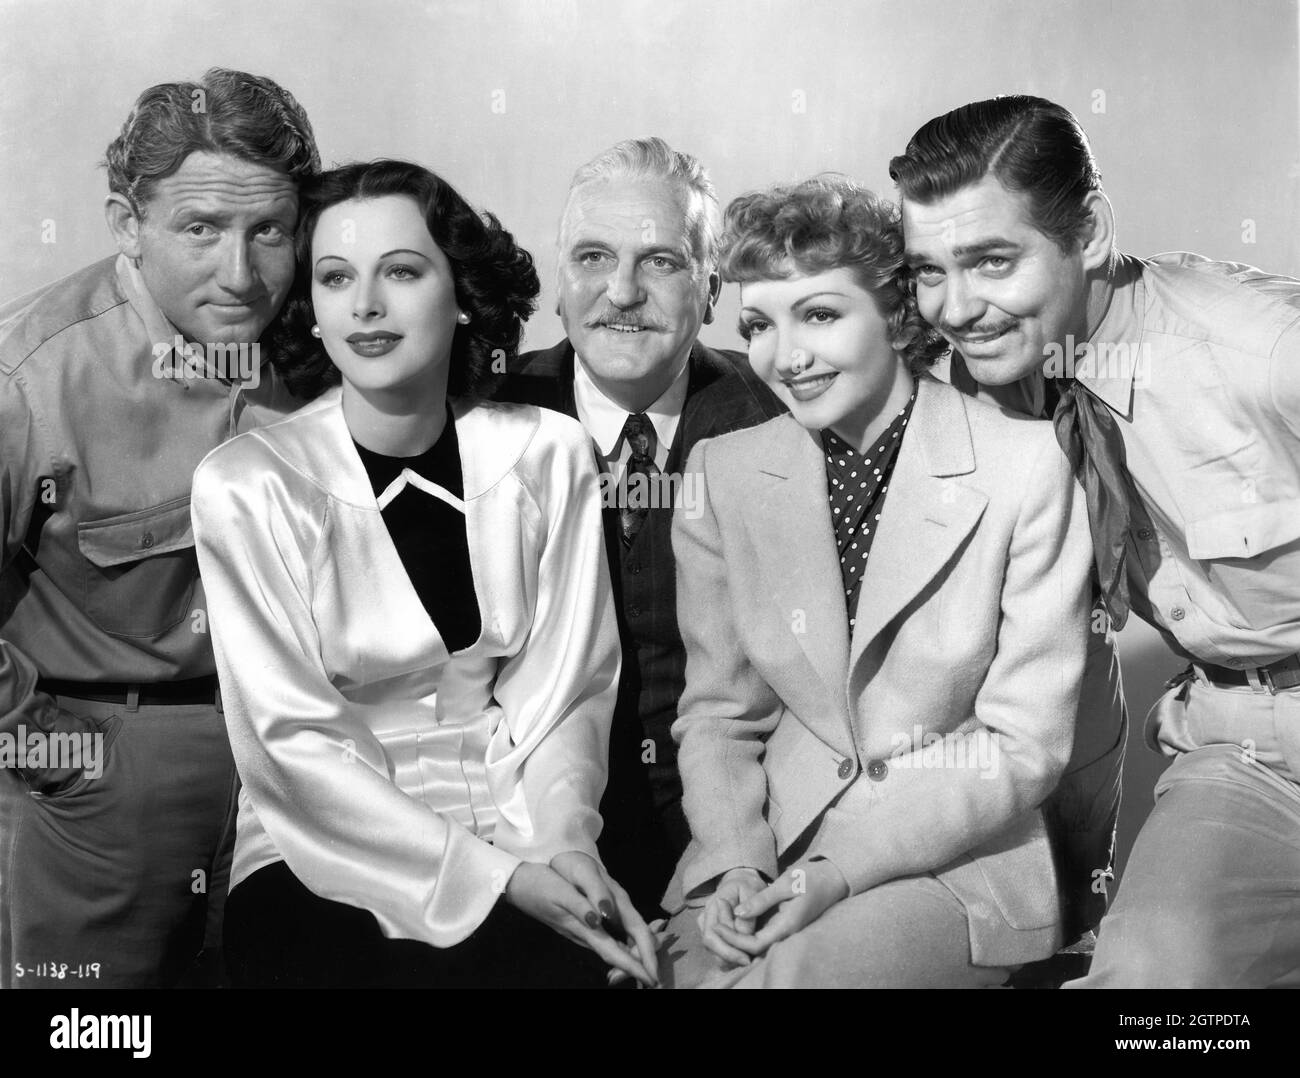 SPENCER TRACY HEDY LAMARR FRANK MORGAN CLAUDETTE COLBERT and CLARK GABLE Publicity Portrait in BOOM TOWN 1940 director JACK CONWAY screenplay John Lee Mahin based on a story by James Edward Grant gowns Gilbert Adrian music Franz Waxman Metro Goldwyn Mayer Stock Photo